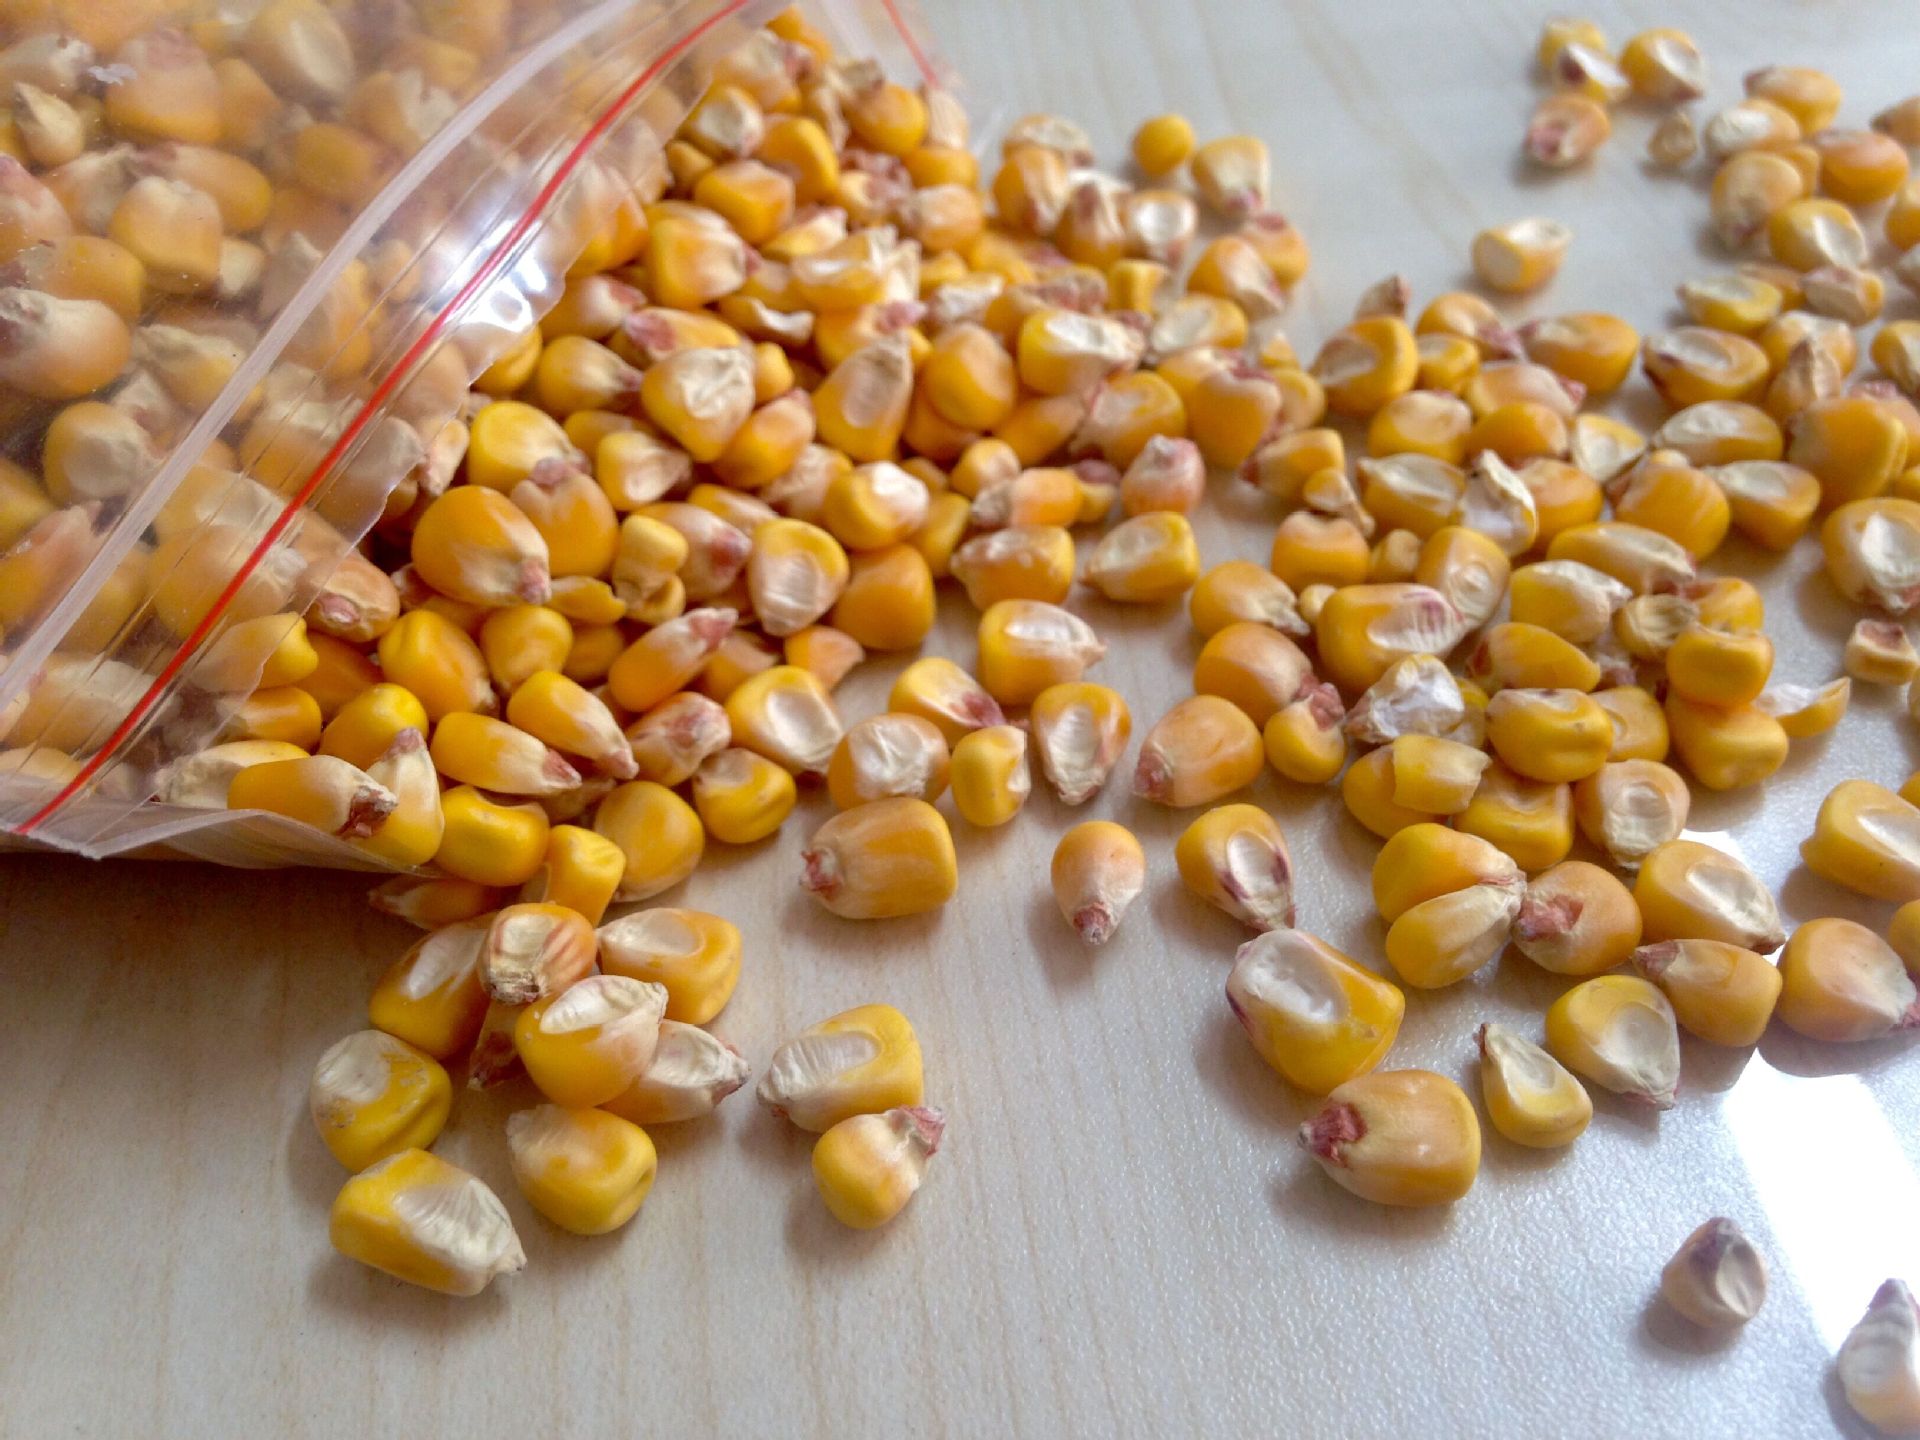 Experts predict that corn in Ukraine will be in short supply